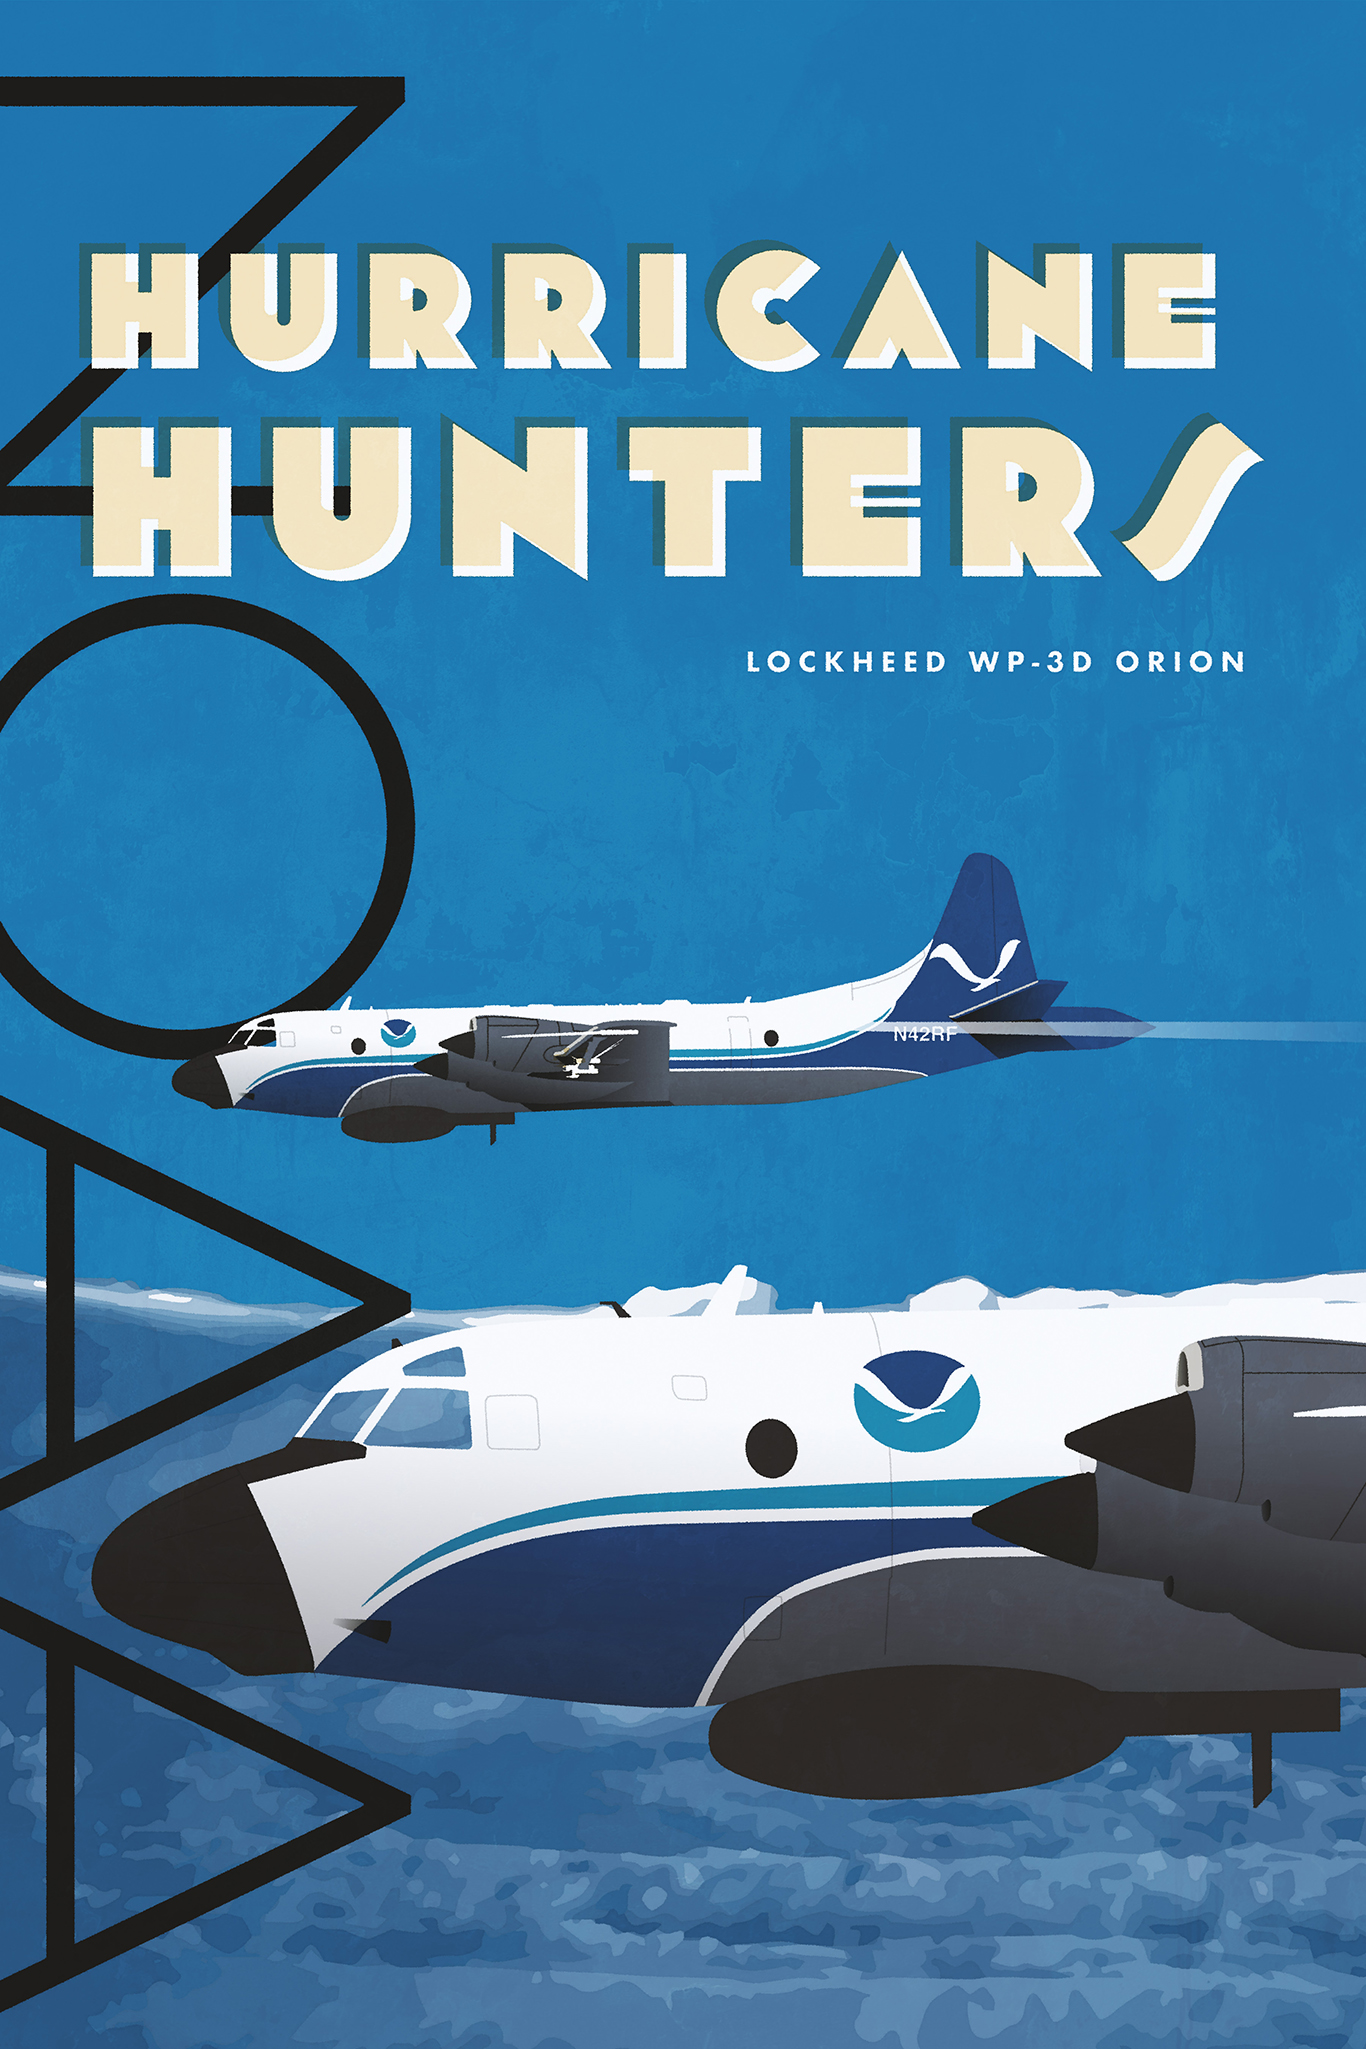 A poster of an image of the sky with two lockheed wp-3d orion planes soaring through the sky with black text that reads NOAA and yellow text that reads “Hurricane Hunters”.